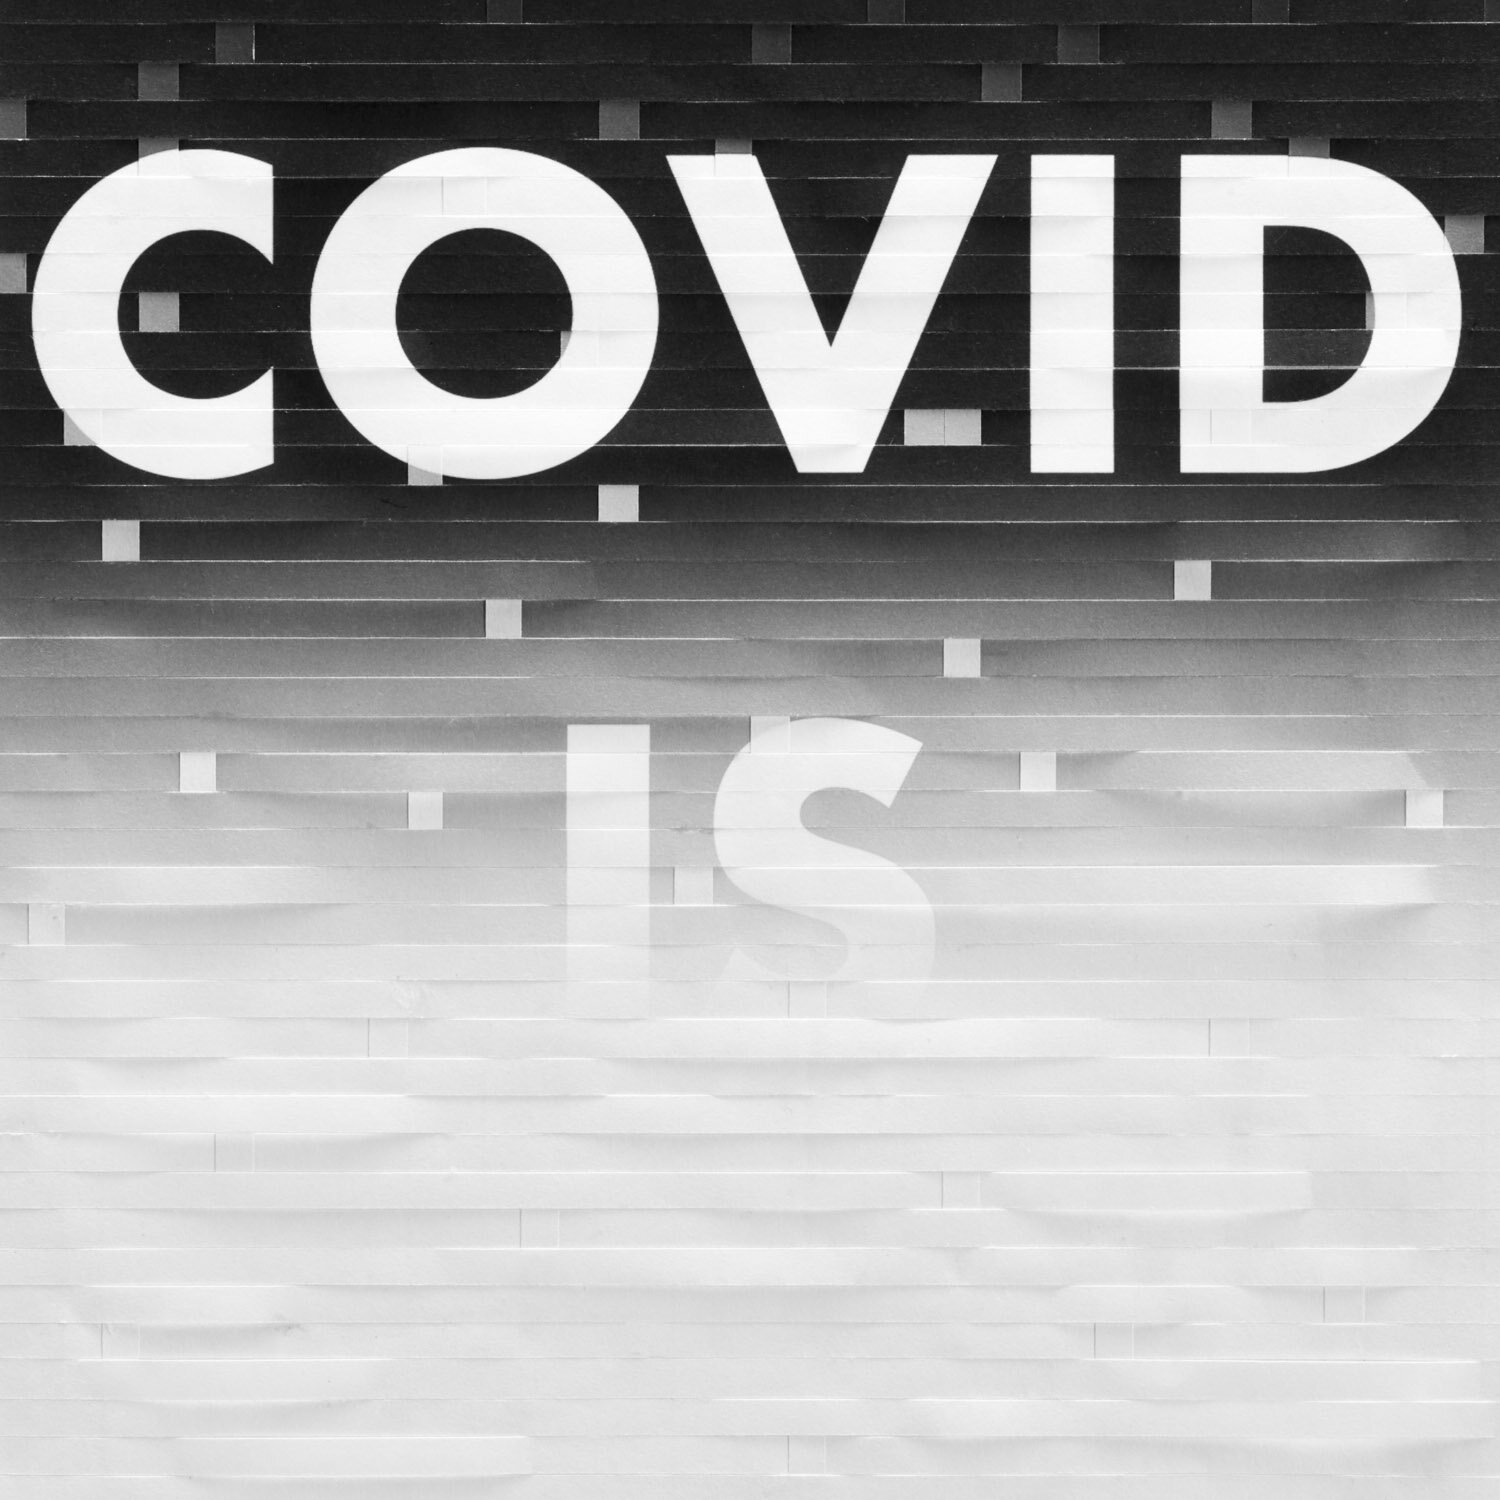 Day 95: "Covid is..."